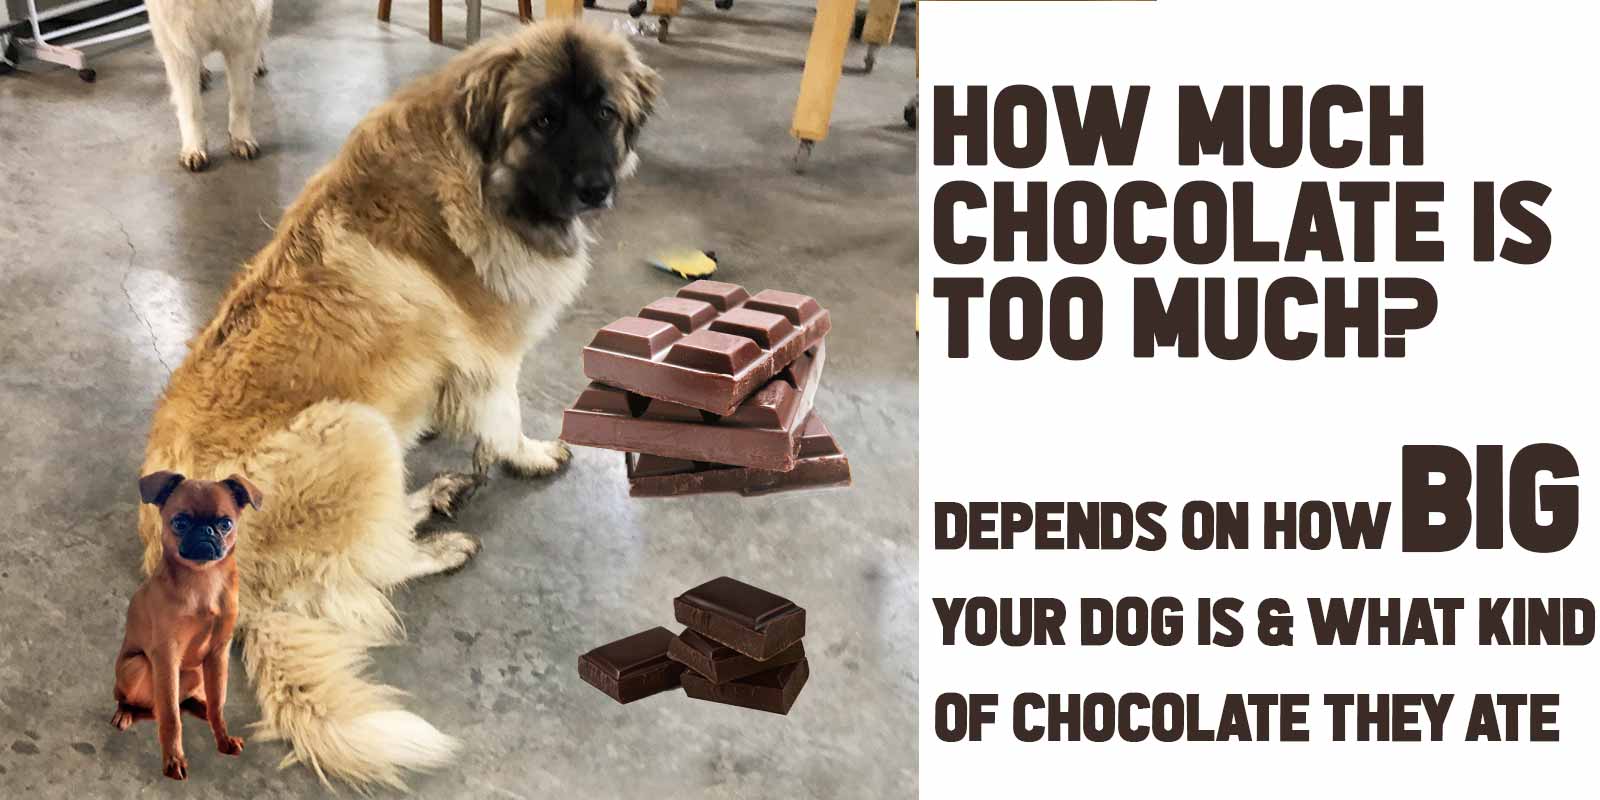 Chocolate Poisoning for Dogs is REAL!